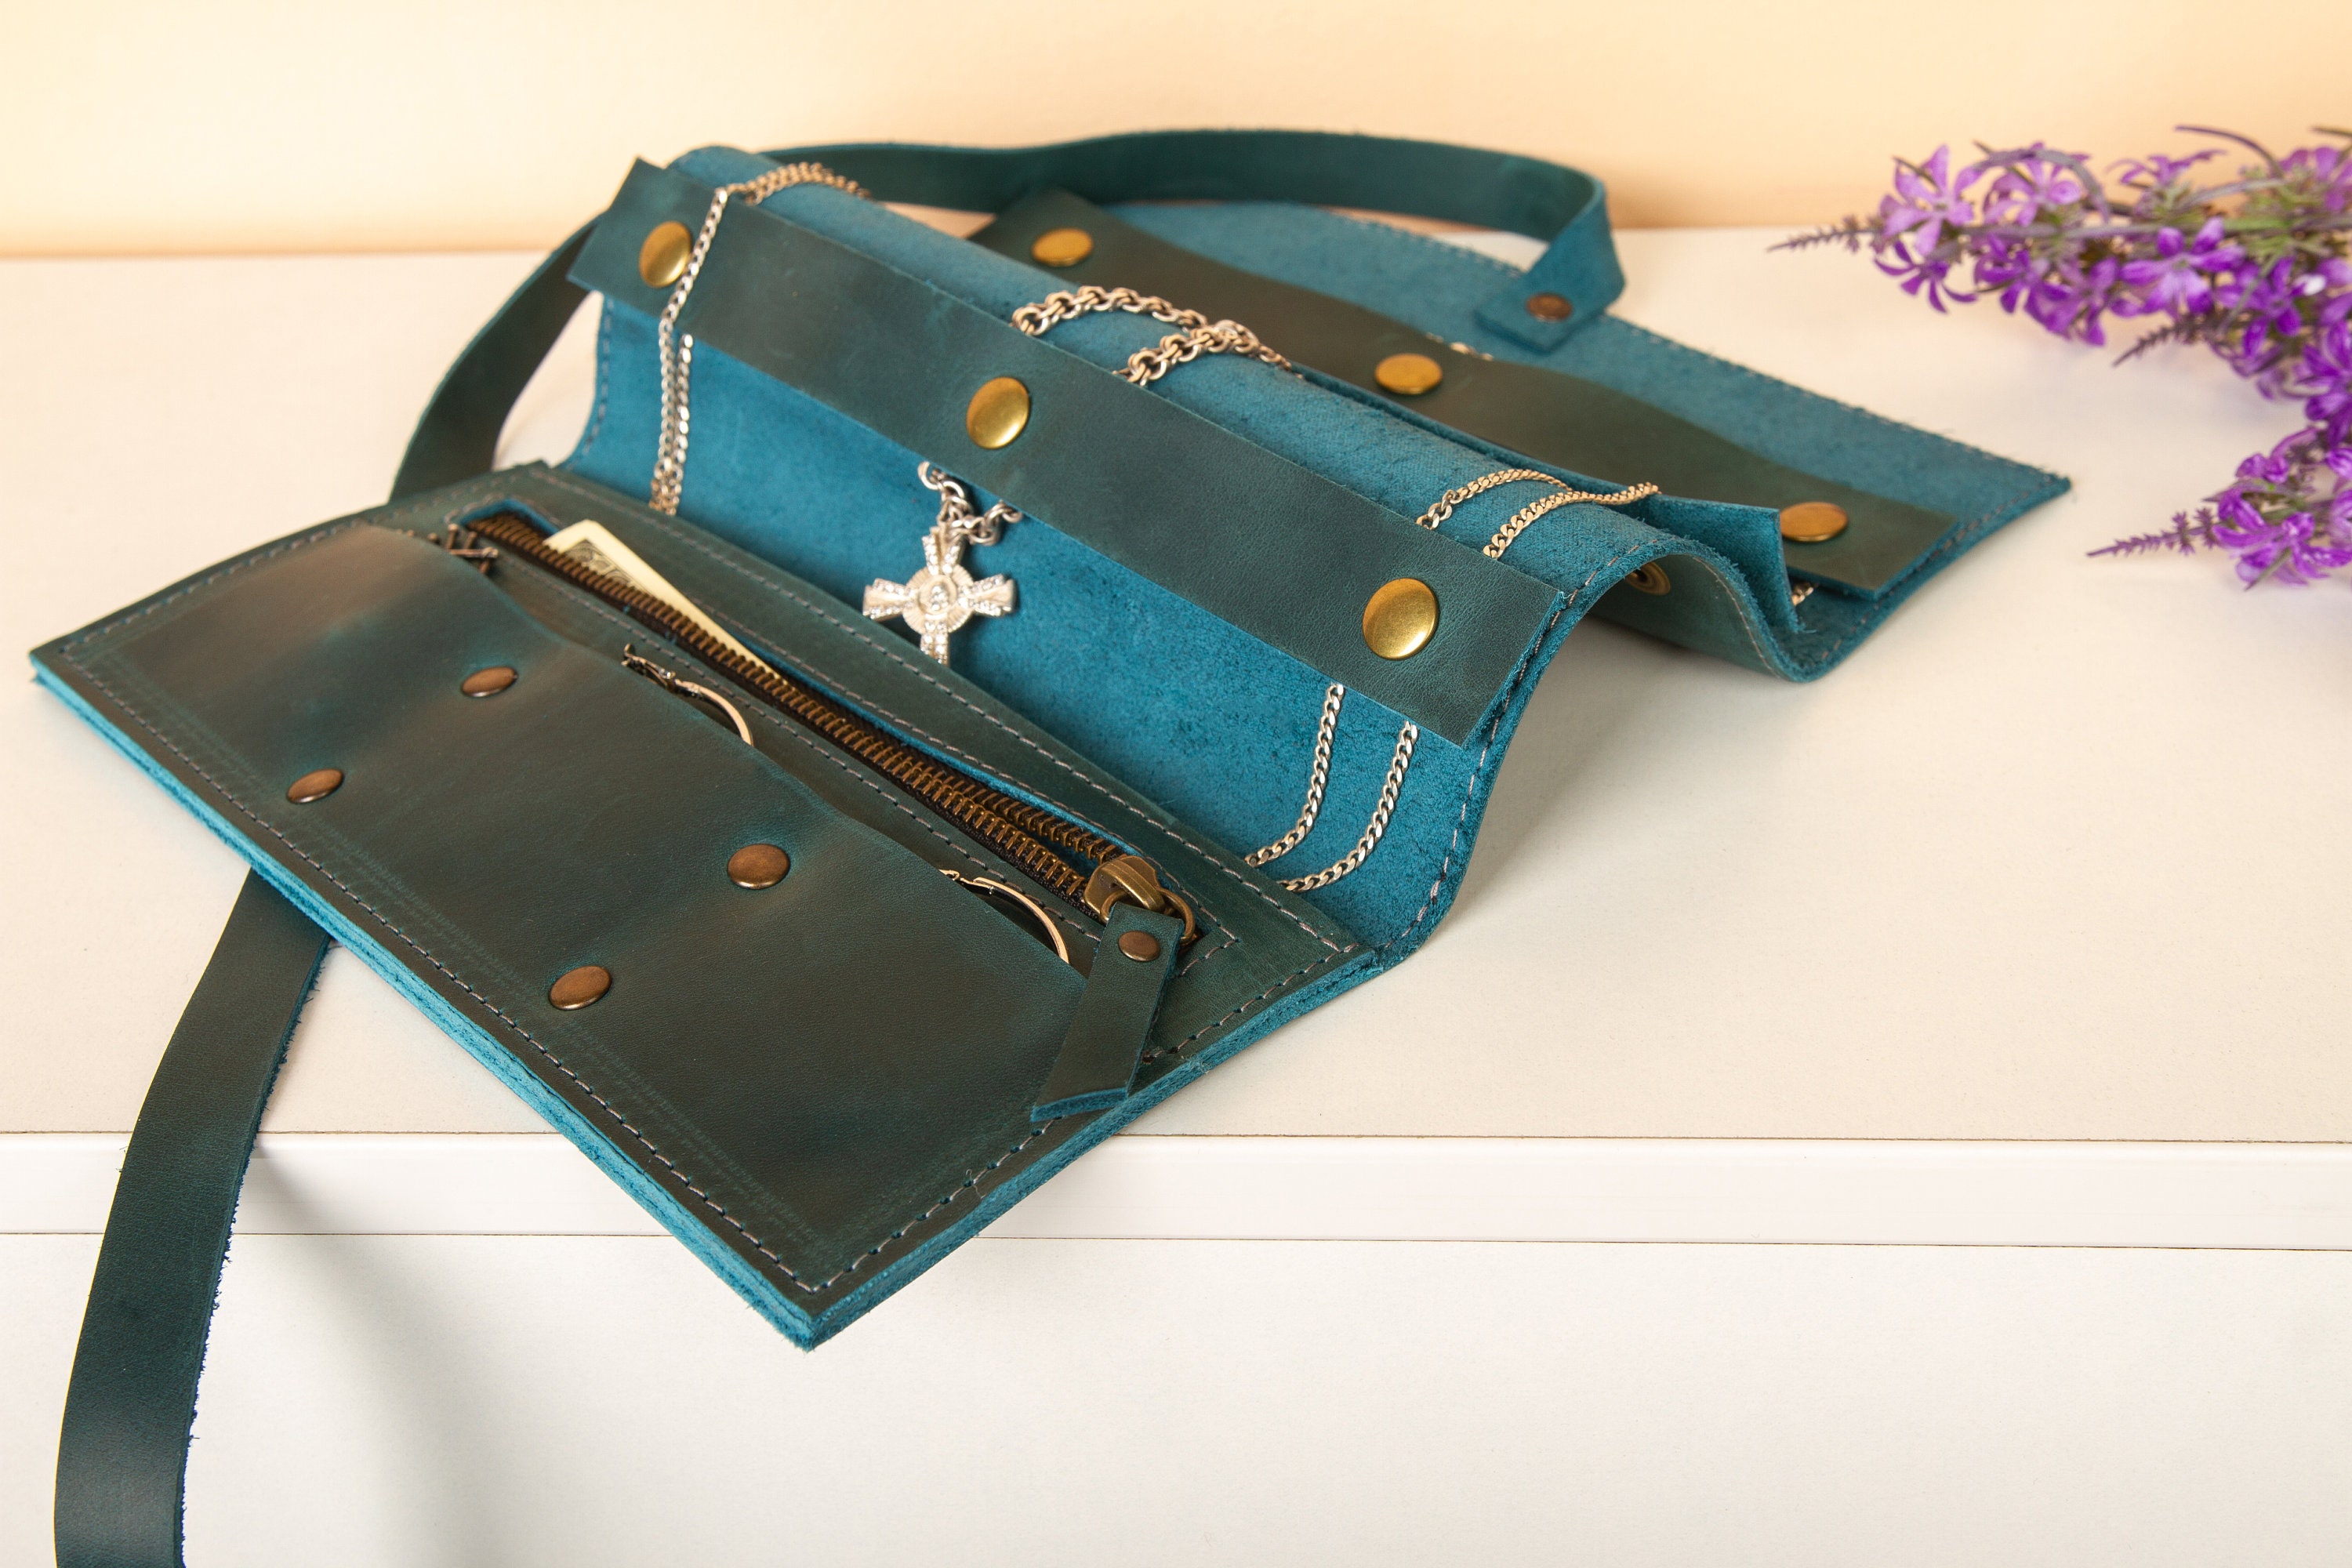 Handmade Travel Jewelry Bags – Designs by Marylou